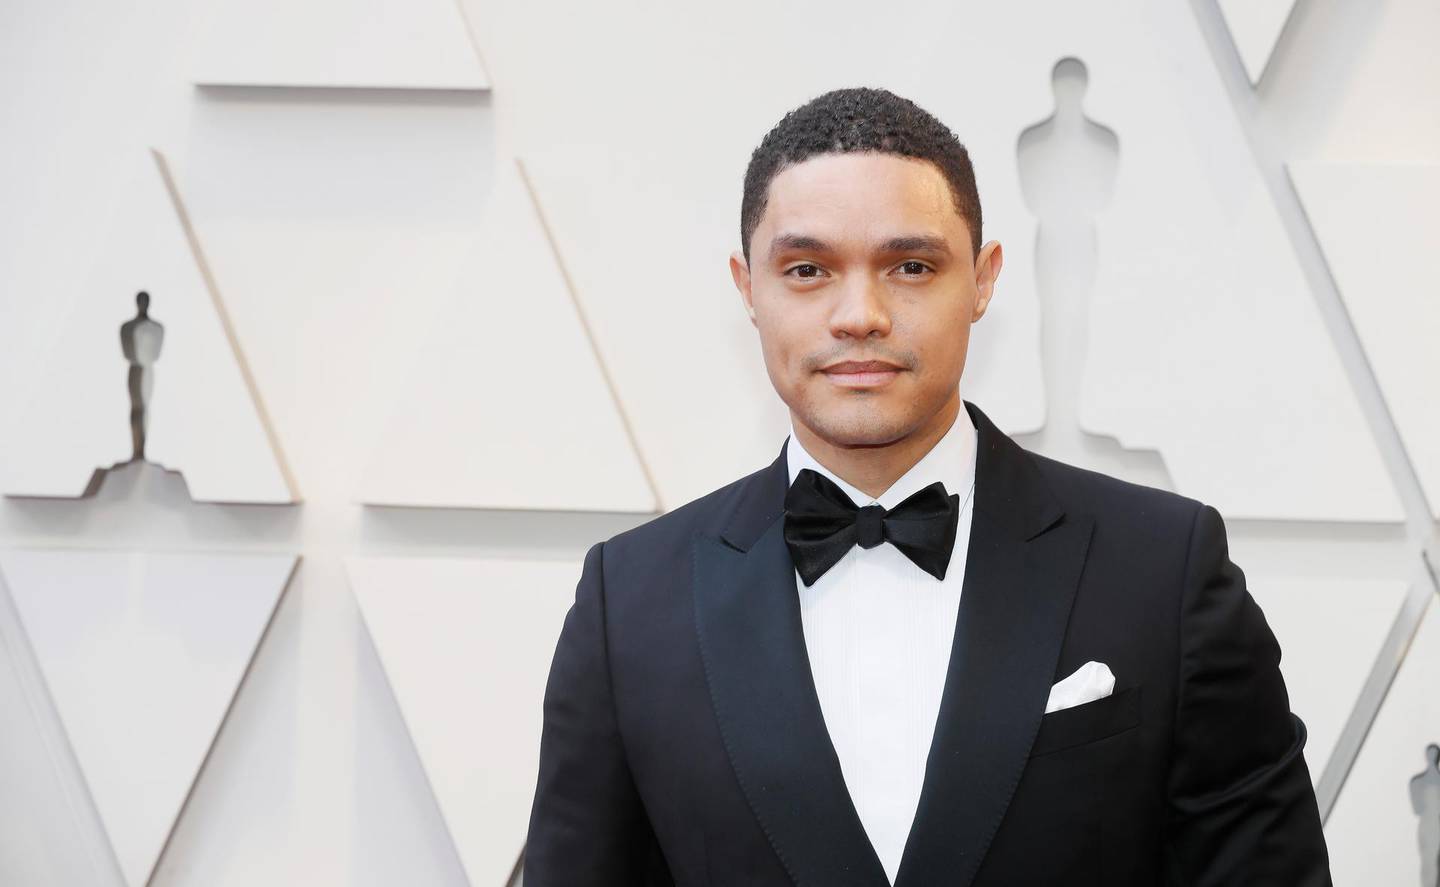 epa07394455 Trevor Noah arrives for the 91st annual Academy Awards ceremony at the Dolby Theatre in Hollywood, California, USA, 24 February 2019. The Oscars are presented for outstanding individual or collective efforts in 24 categories in filmmaking.  EPA/ETIENNE LAURENT